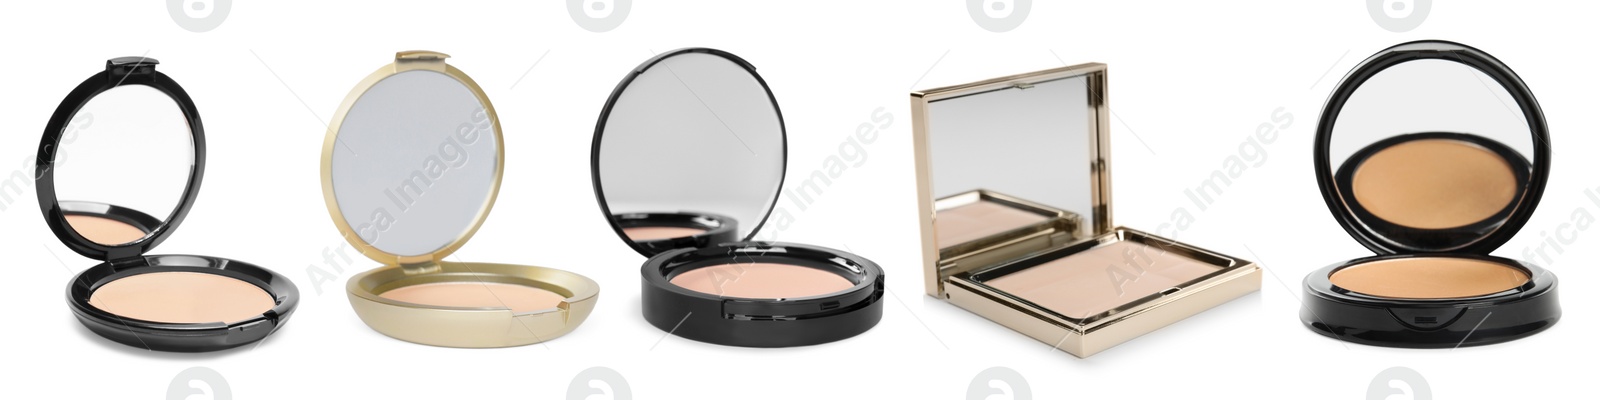 Image of Different face powders isolated on white. Collection of makeup products